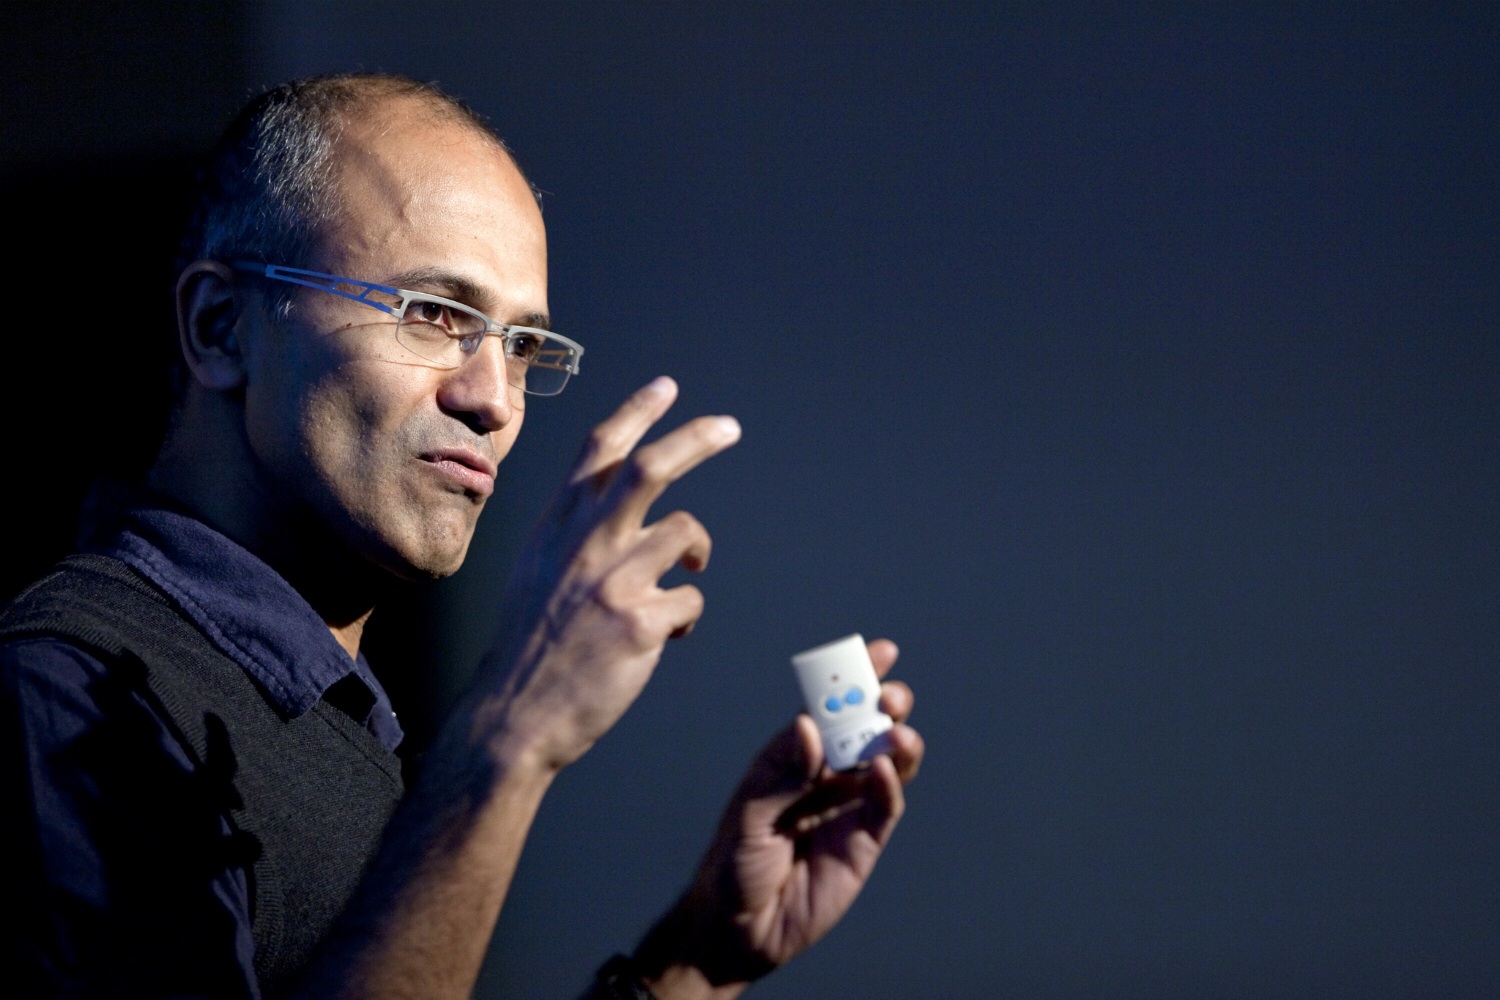 Microsoft's Satya Nadella presents at an event featuring the company's Bing search engine on Dec. 15, 2010. (Bloomberg/Getty Images)